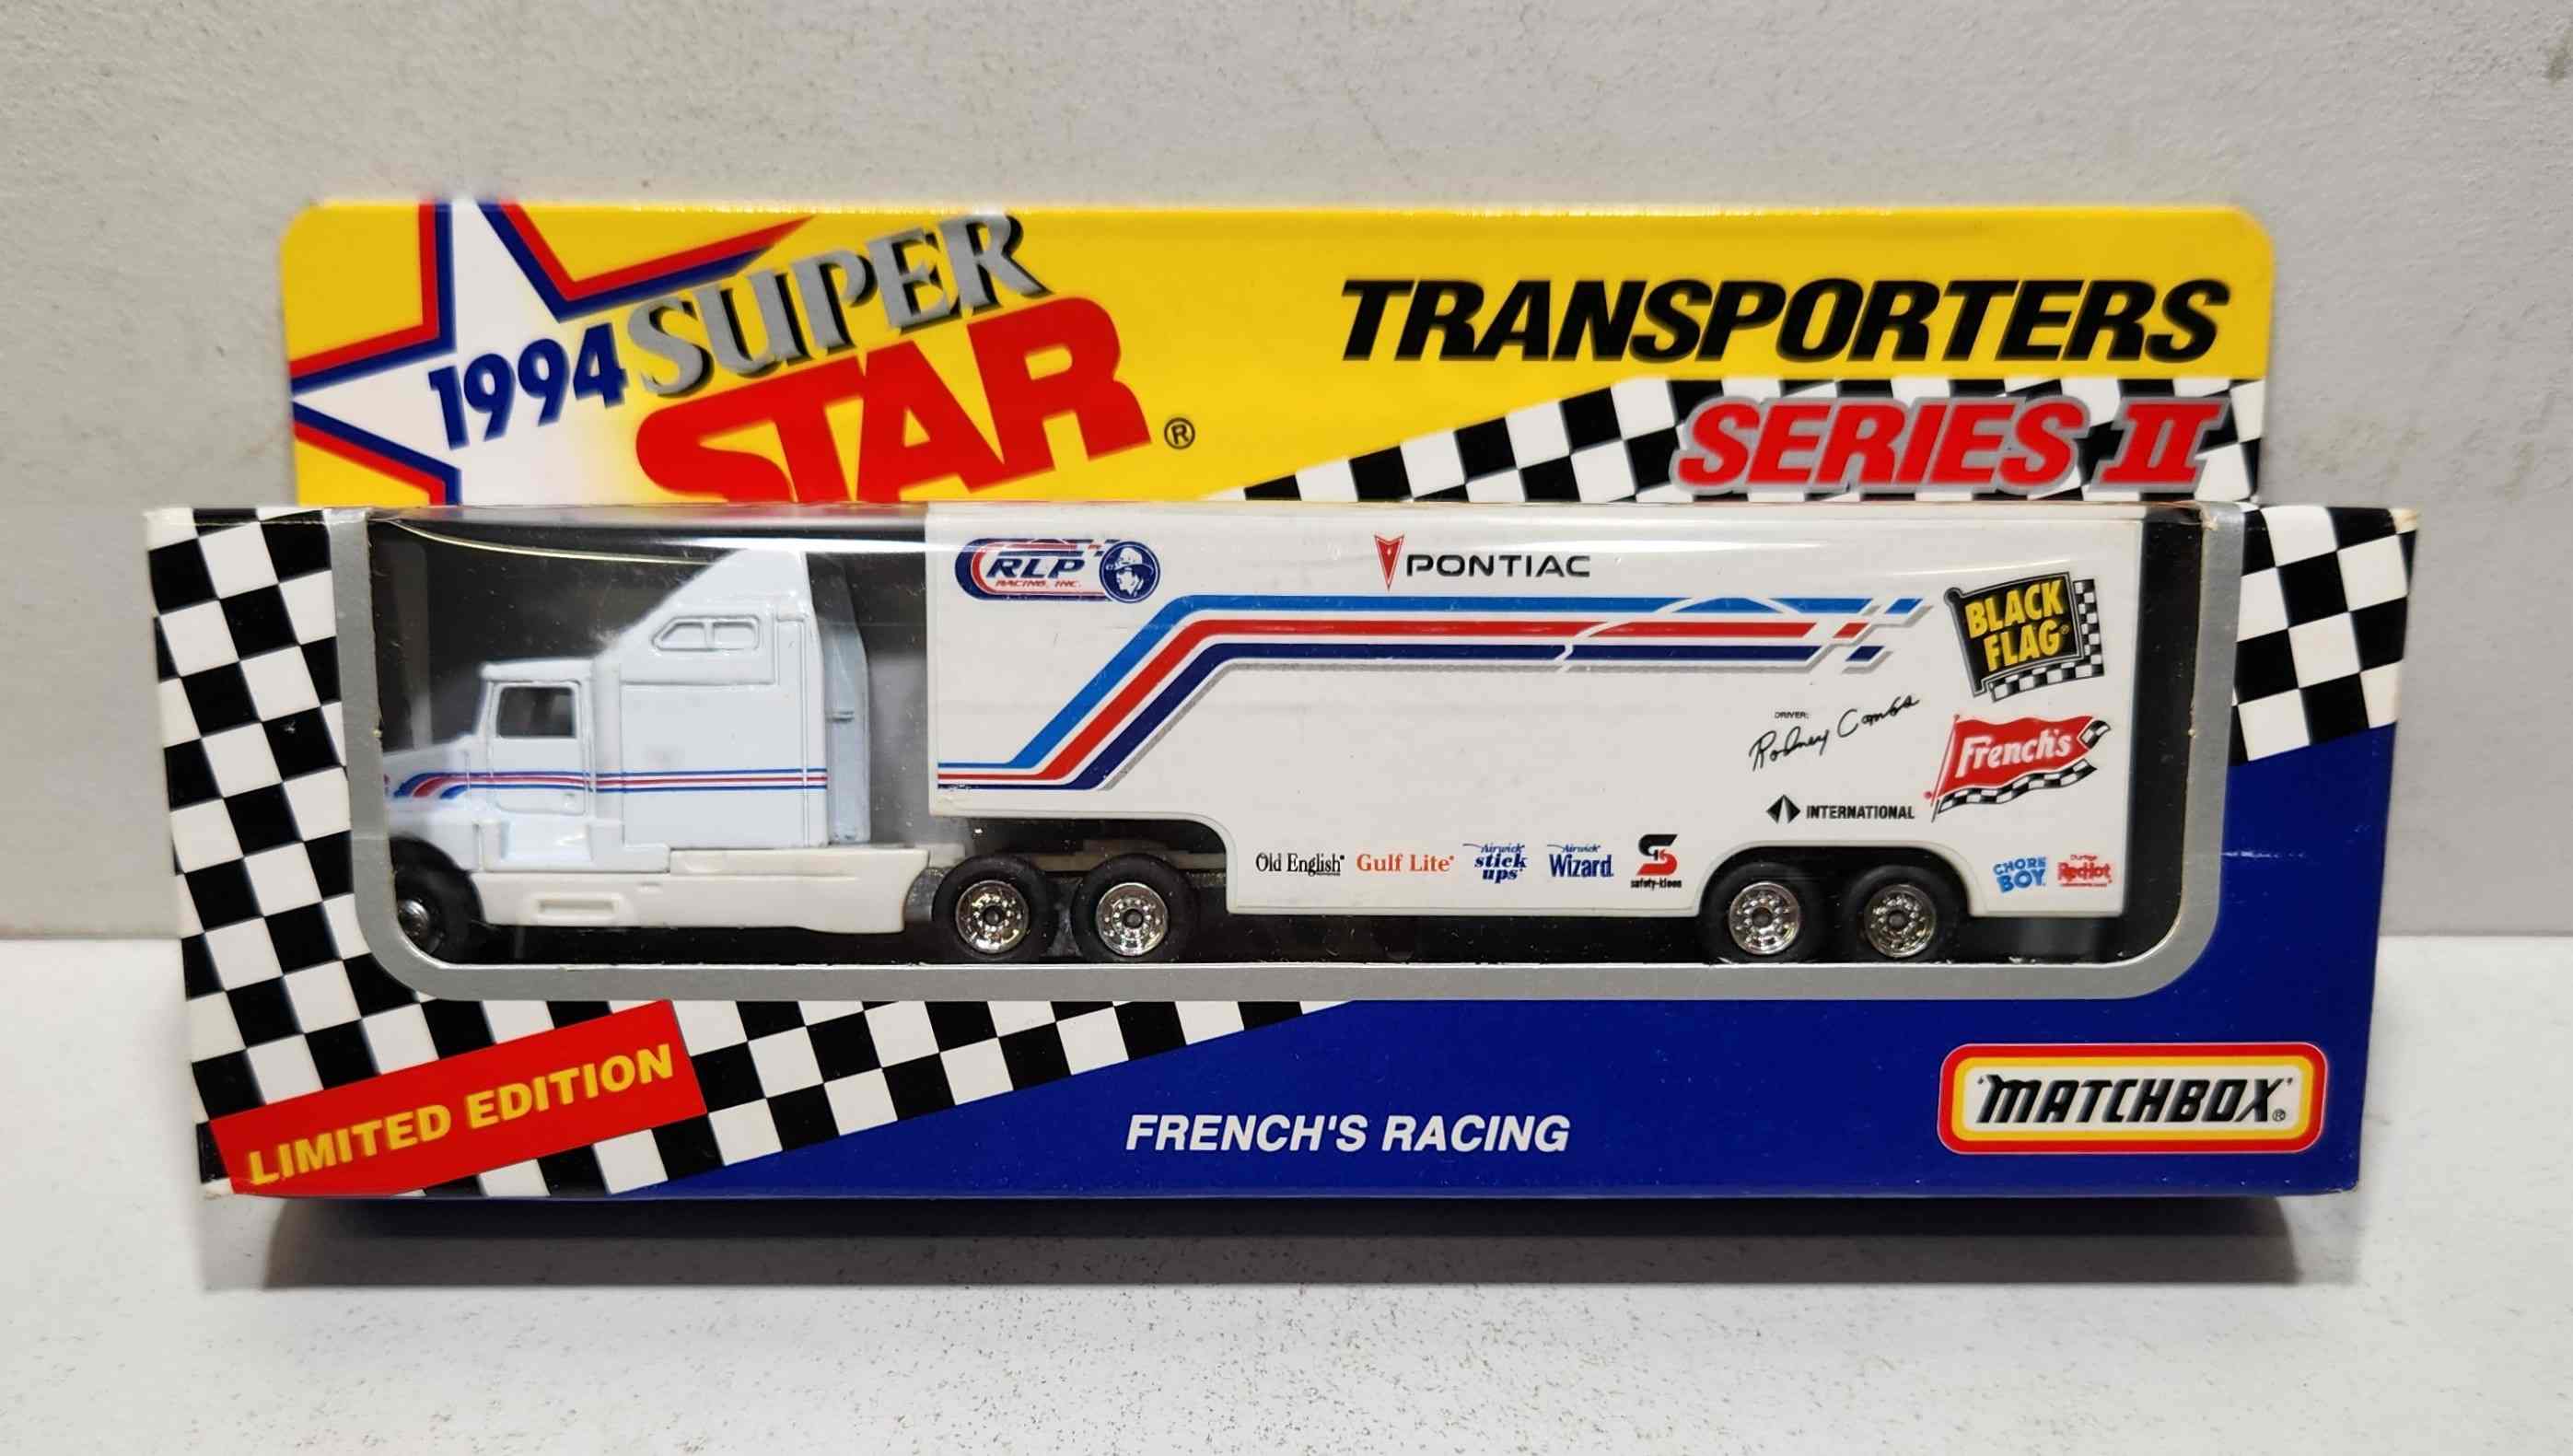 1994 Rodney Combs 1/80th Black Flag Frenchs "Busch Series" Transporter